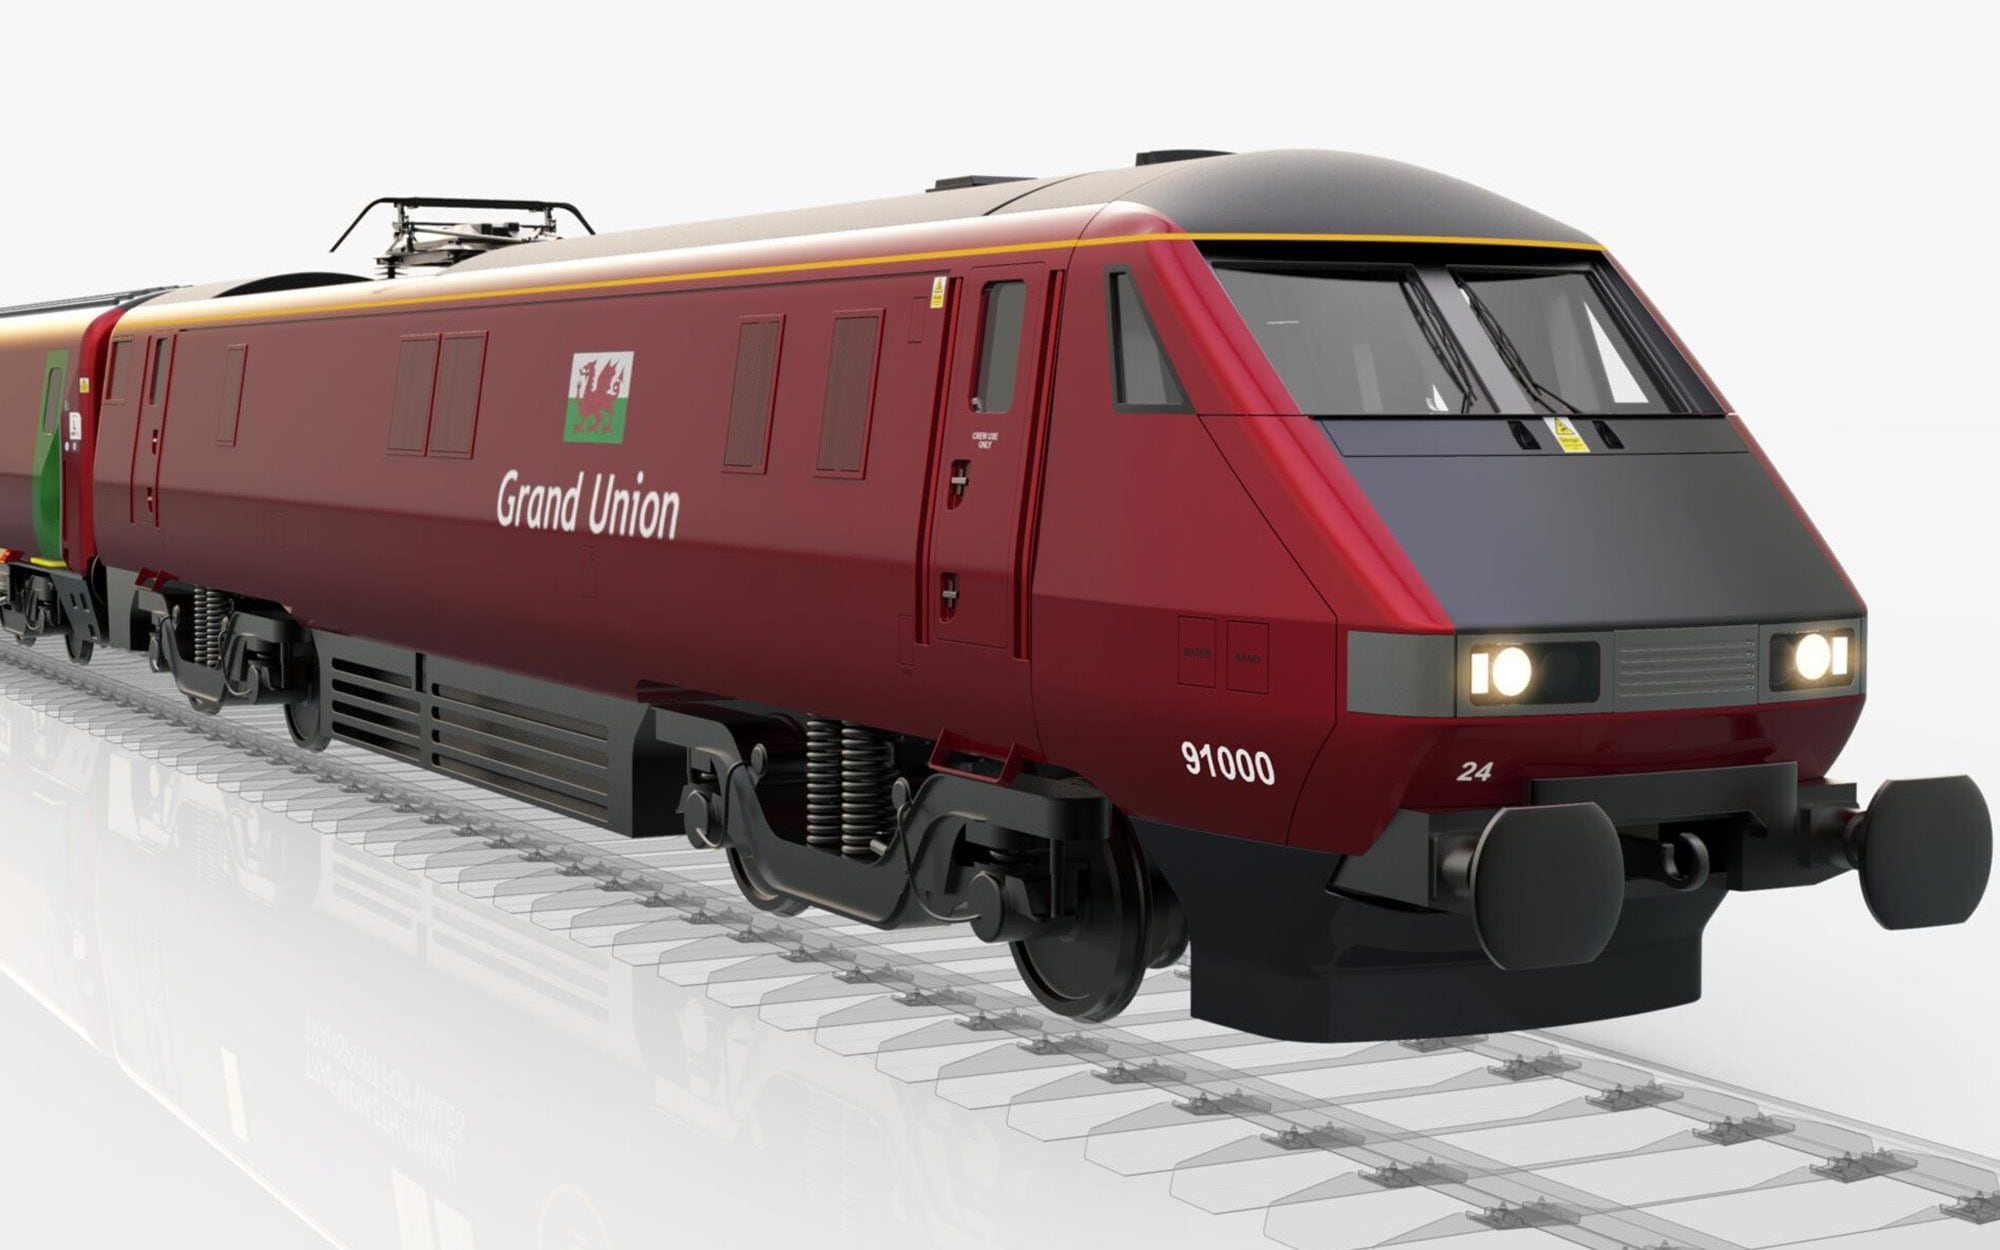 new firm to run direct trains from london to carmarthen and stirling